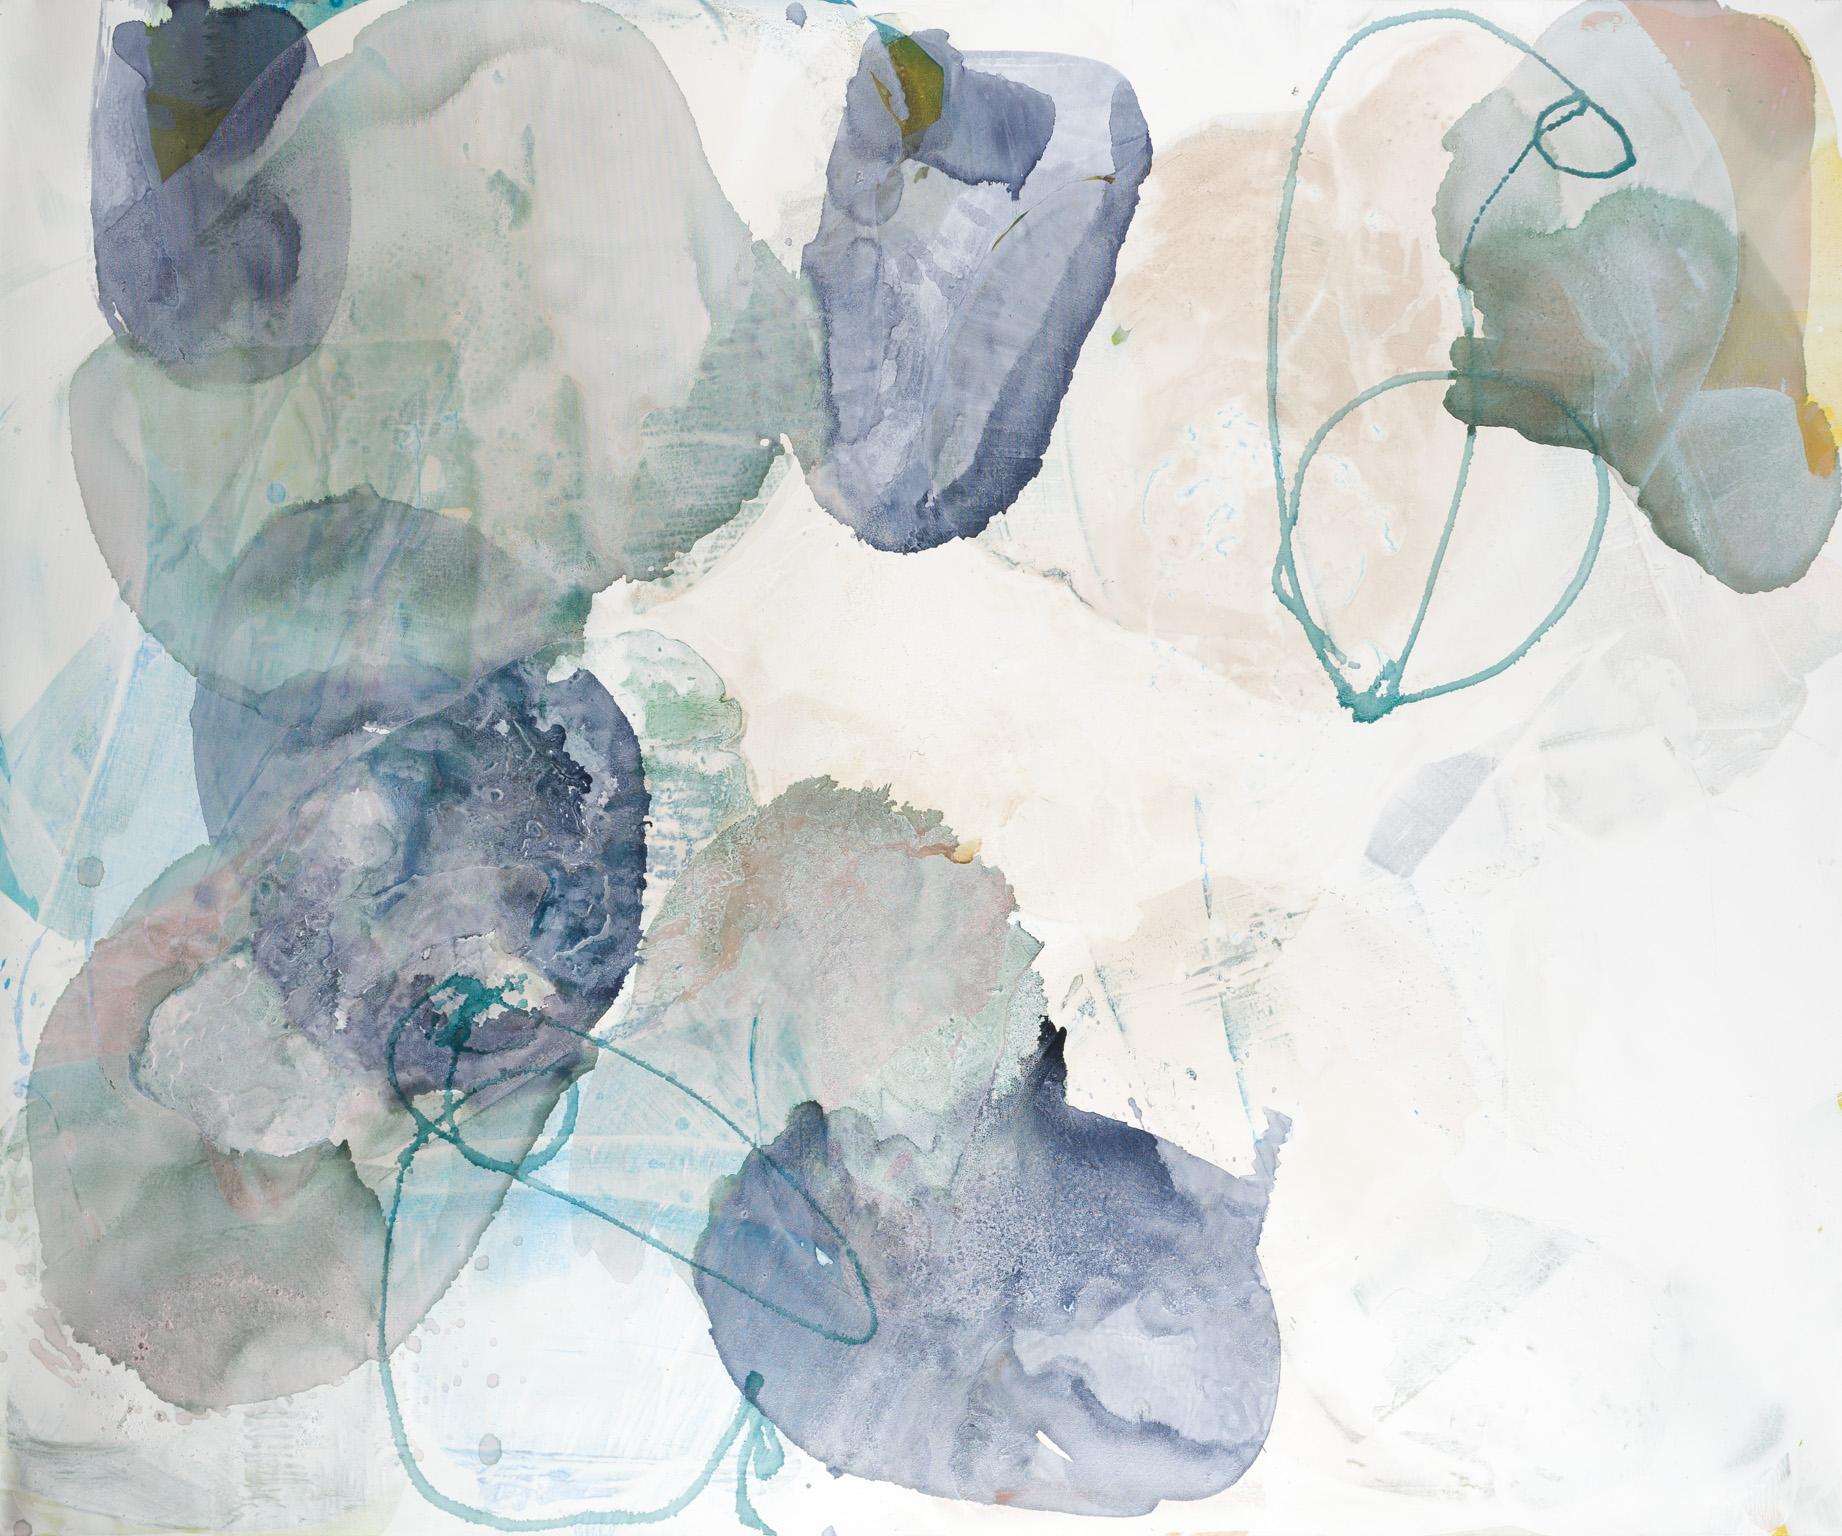 Water Petals 10 - Abstract Mixed Media Art by Liz Barber Leventhal